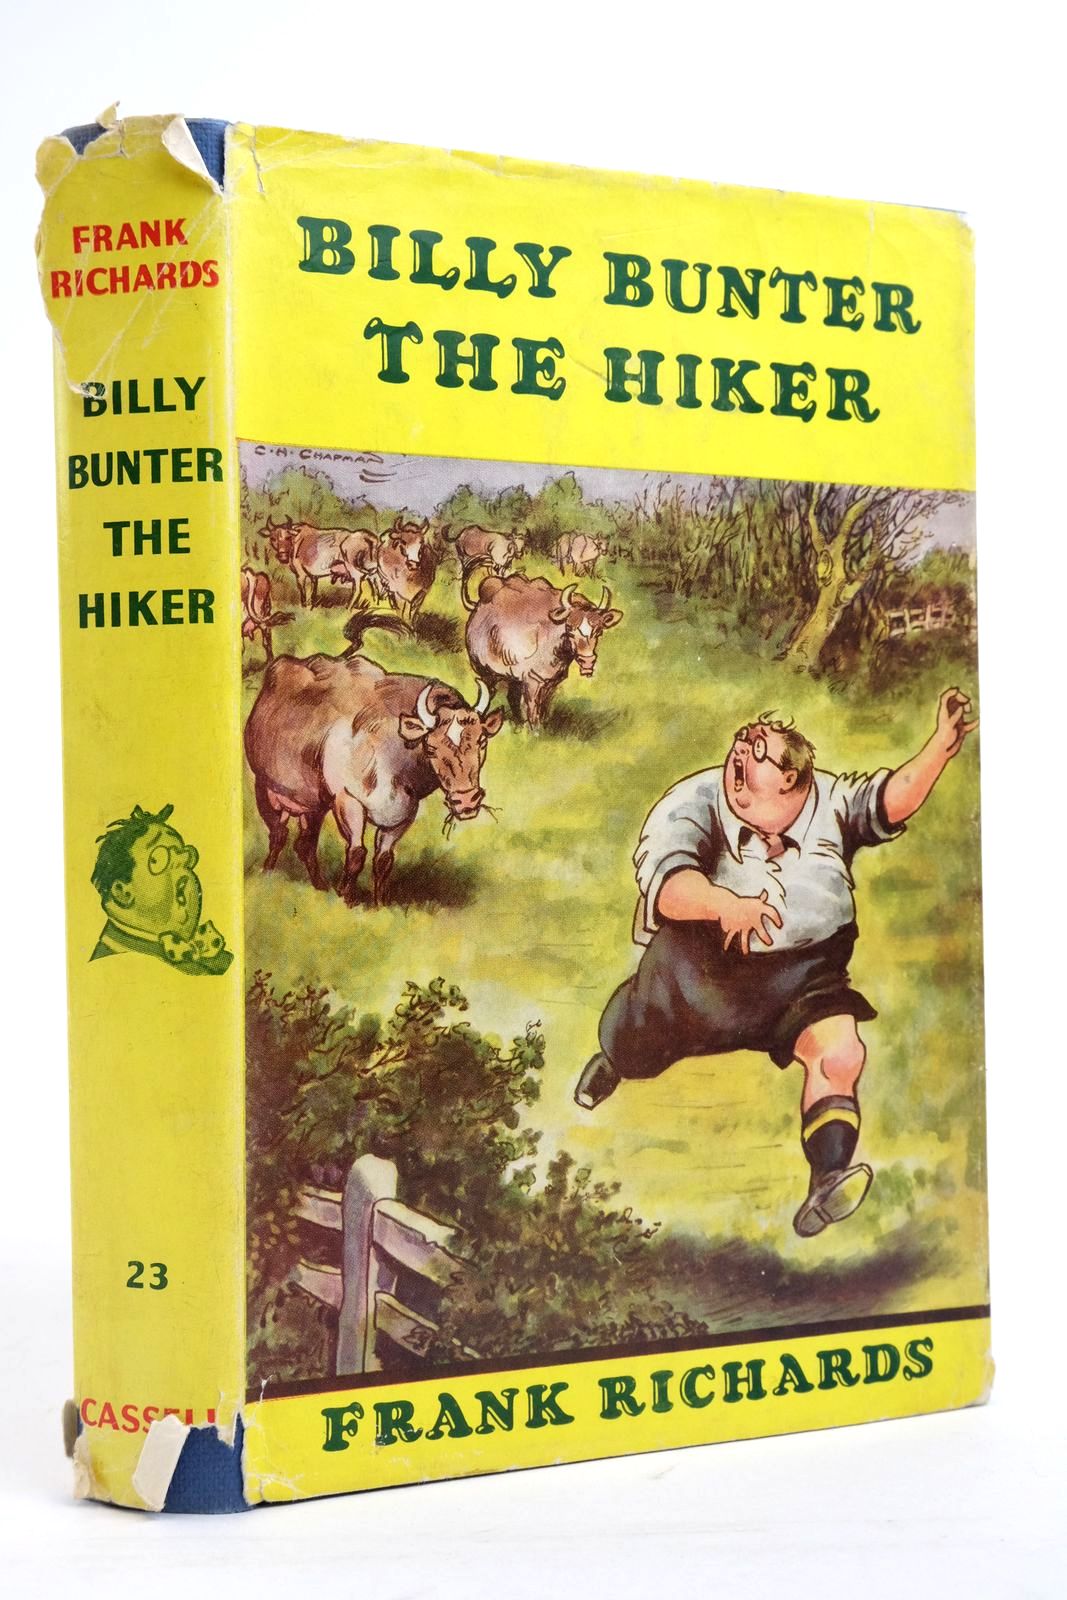 Photo of BILLY BUNTER THE HIKER written by Richards, Frank illustrated by Chapman, C.H. published by Cassell & Co. Ltd. (STOCK CODE: 2136152)  for sale by Stella & Rose's Books